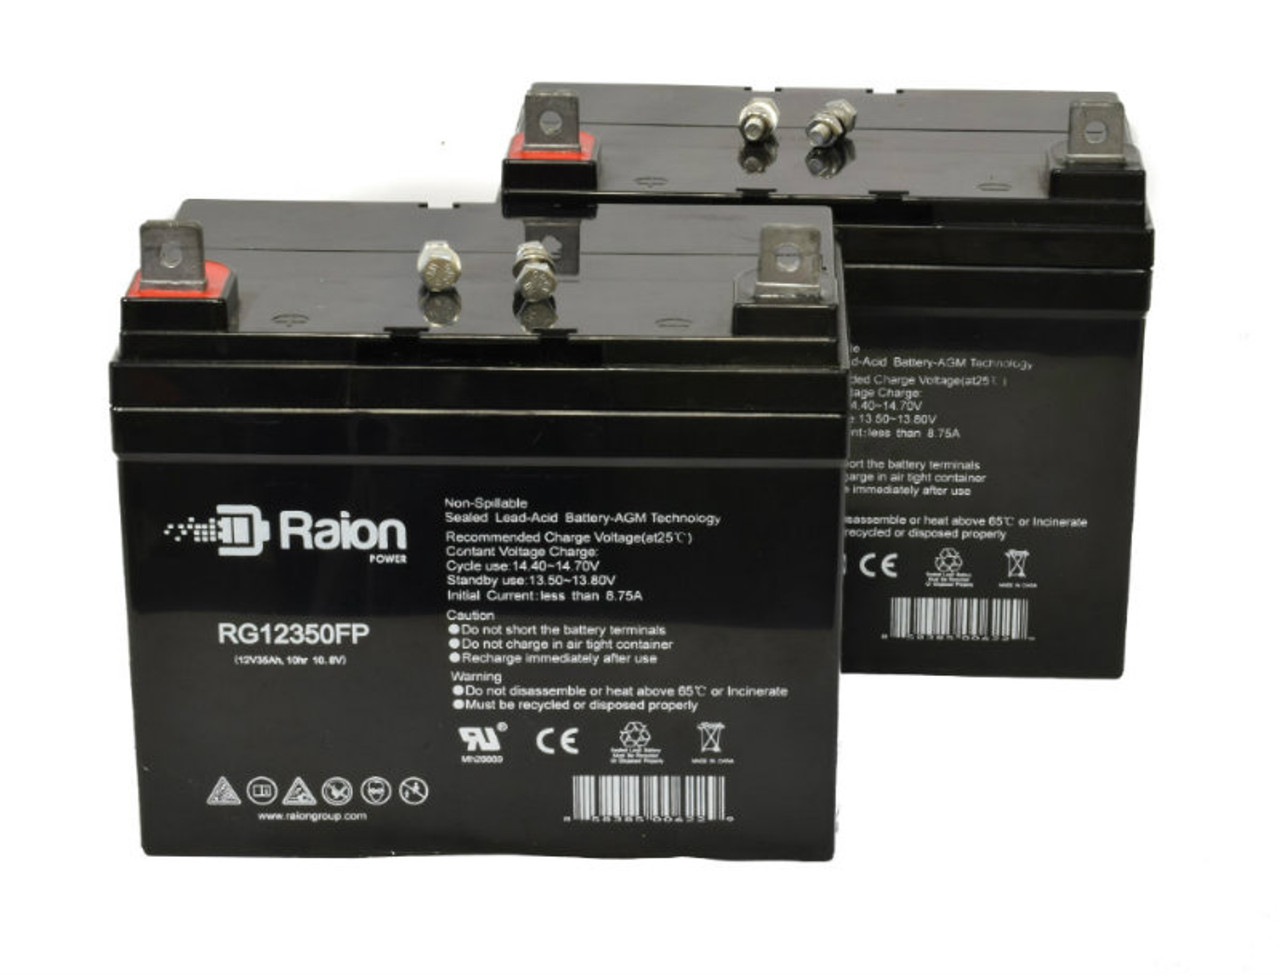 Raion Power Replacement 12V 35Ah Lawn Mower Battery for Ingersol Equipment 5016 - 2 Pack